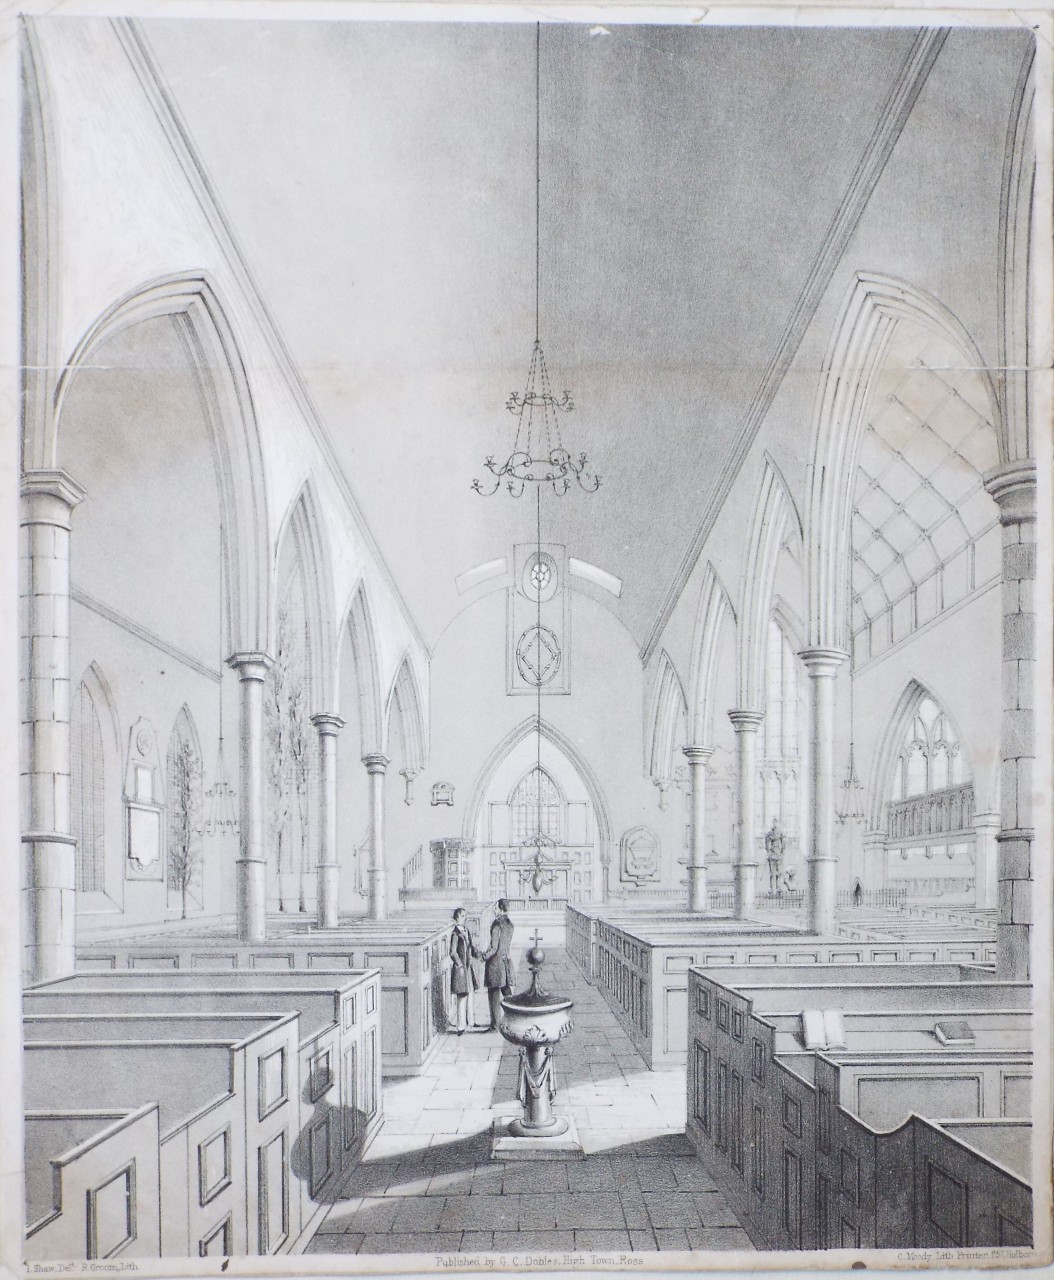 Lithograph - Interior of Ross-on-Wye church - Groom